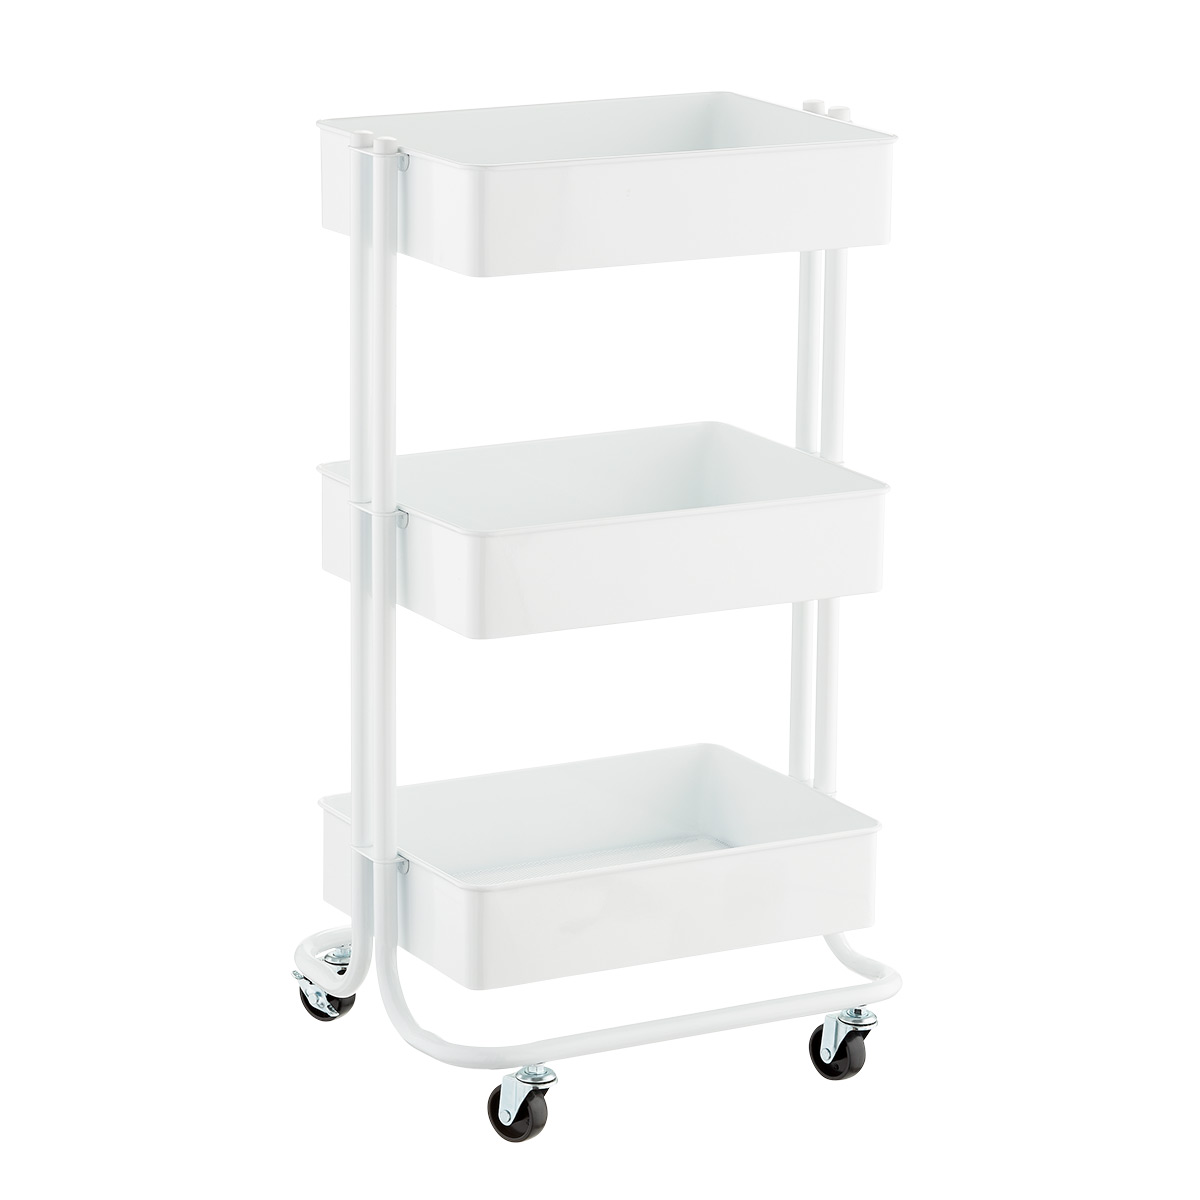 https://images.containerstore.com/catalogimages/358615/10076838-3-tier-rolling-craft-cart-w.jpg